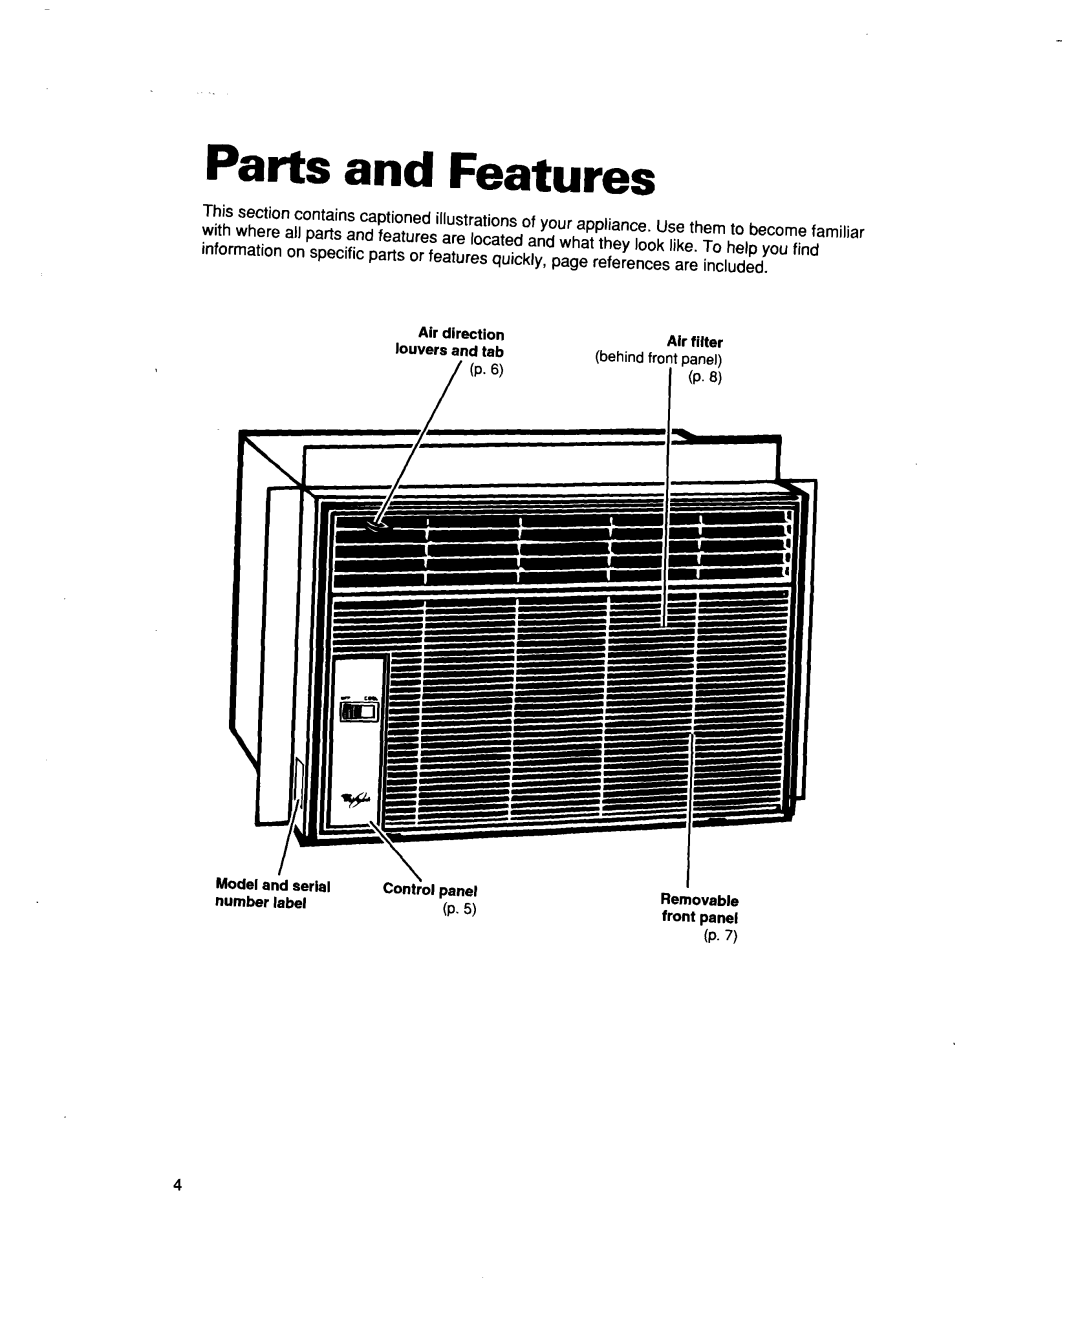 Whirlpool ACM492 warranty Parts and Features 